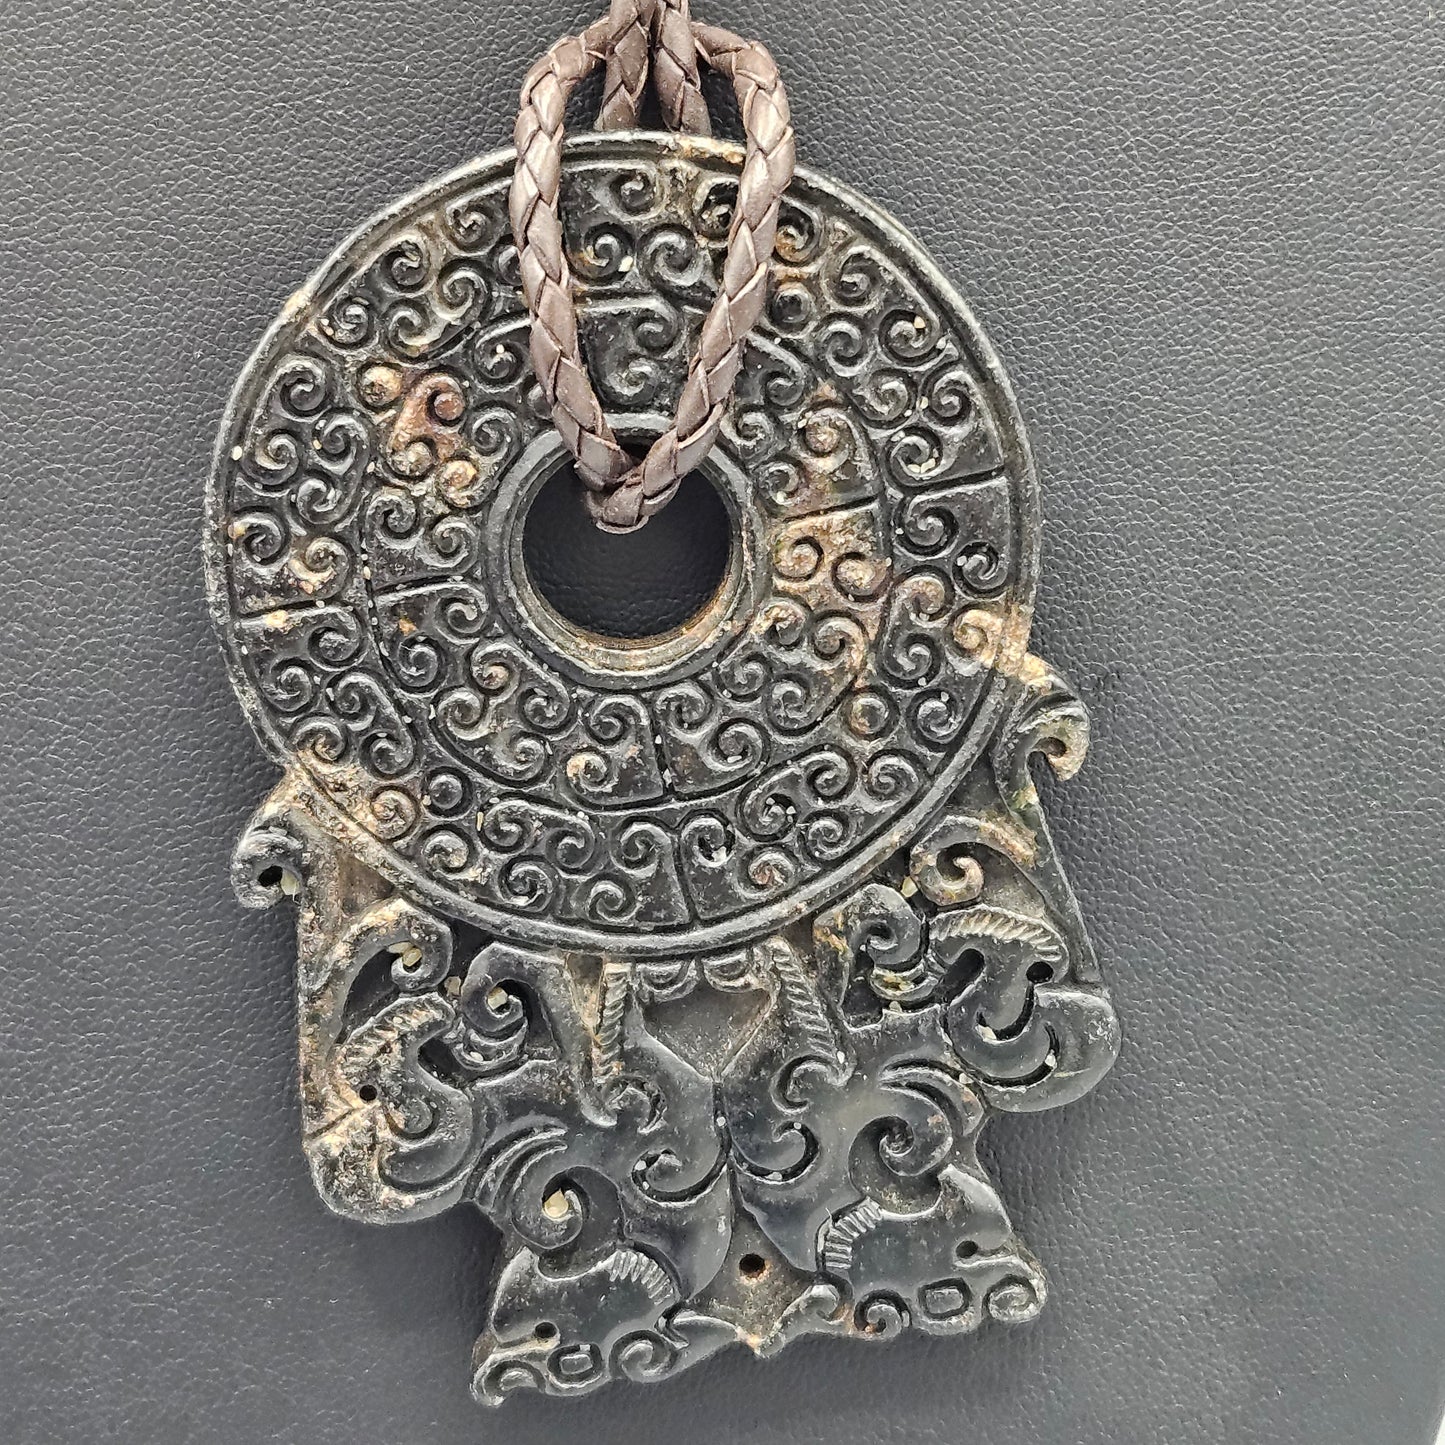 Vintage Carved Stone Necklace Pendant on Cord